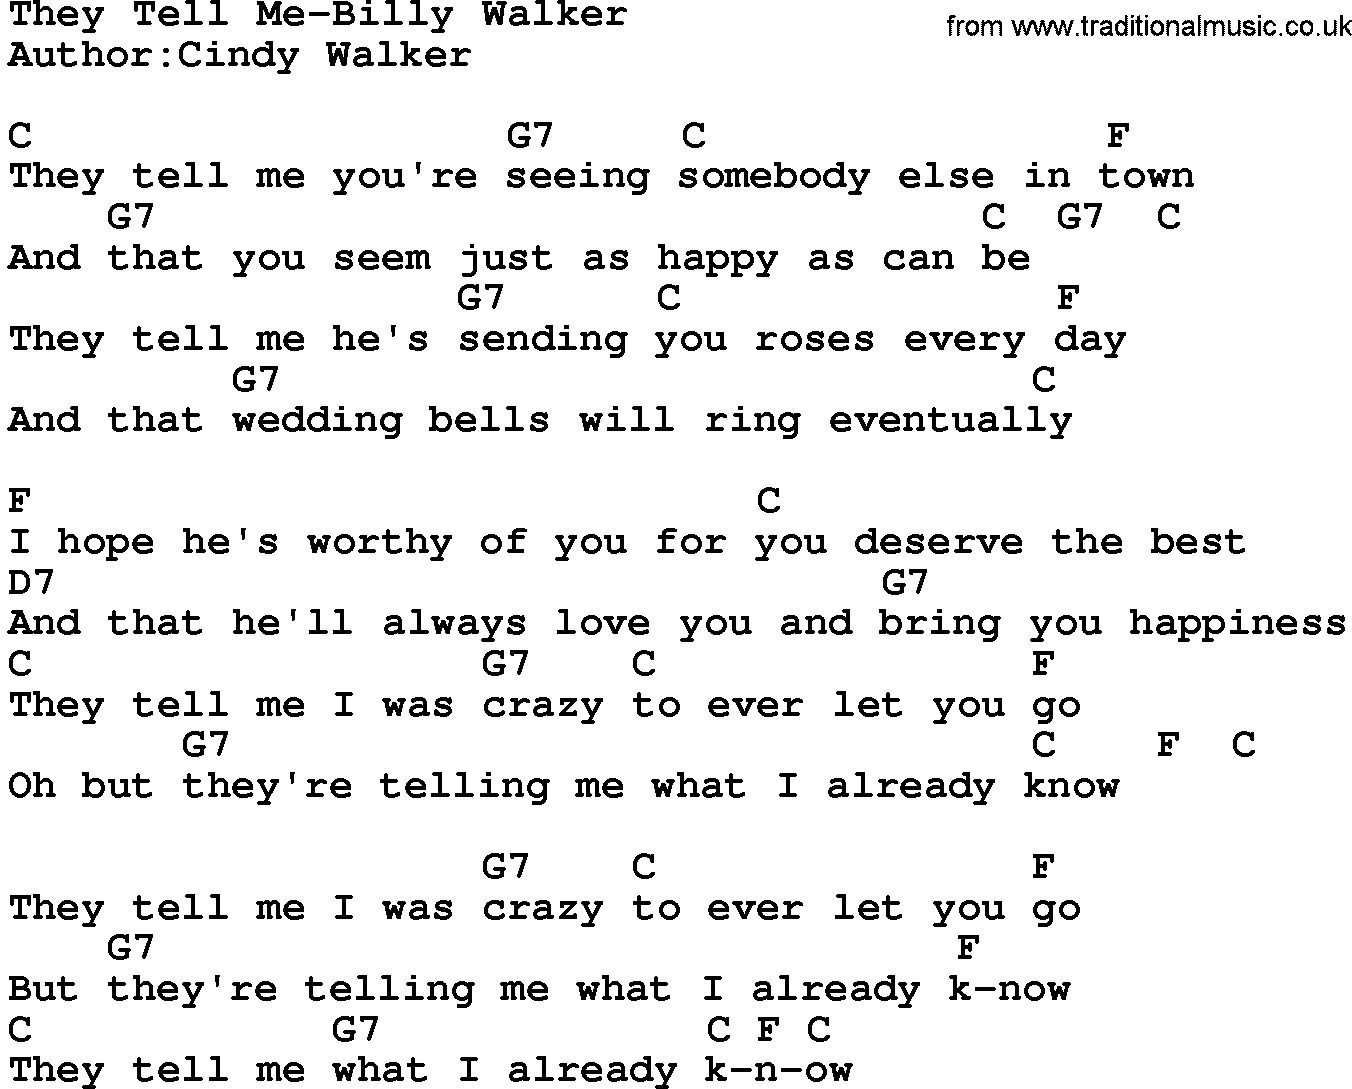 Country music song: They Tell Me-Billy Walker lyrics and chords